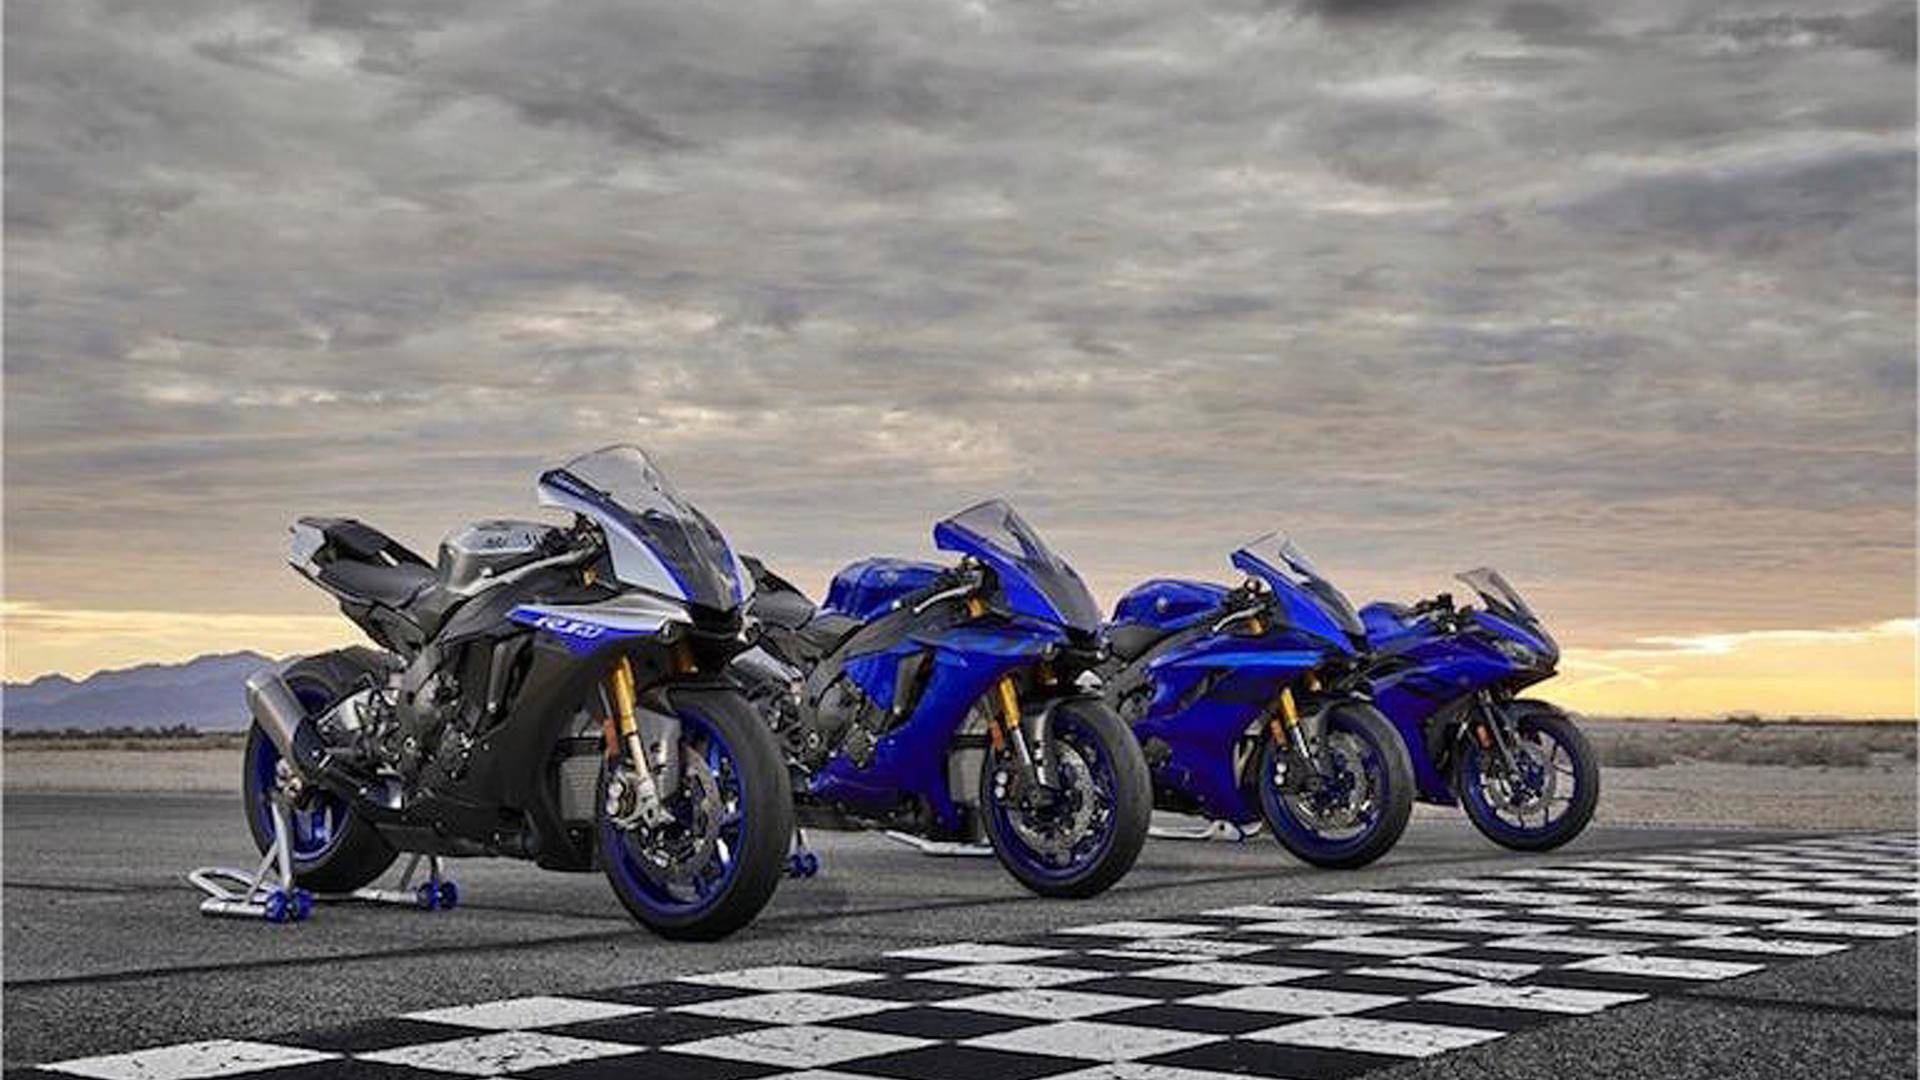 R R or R3? Which Sportbike Fits You